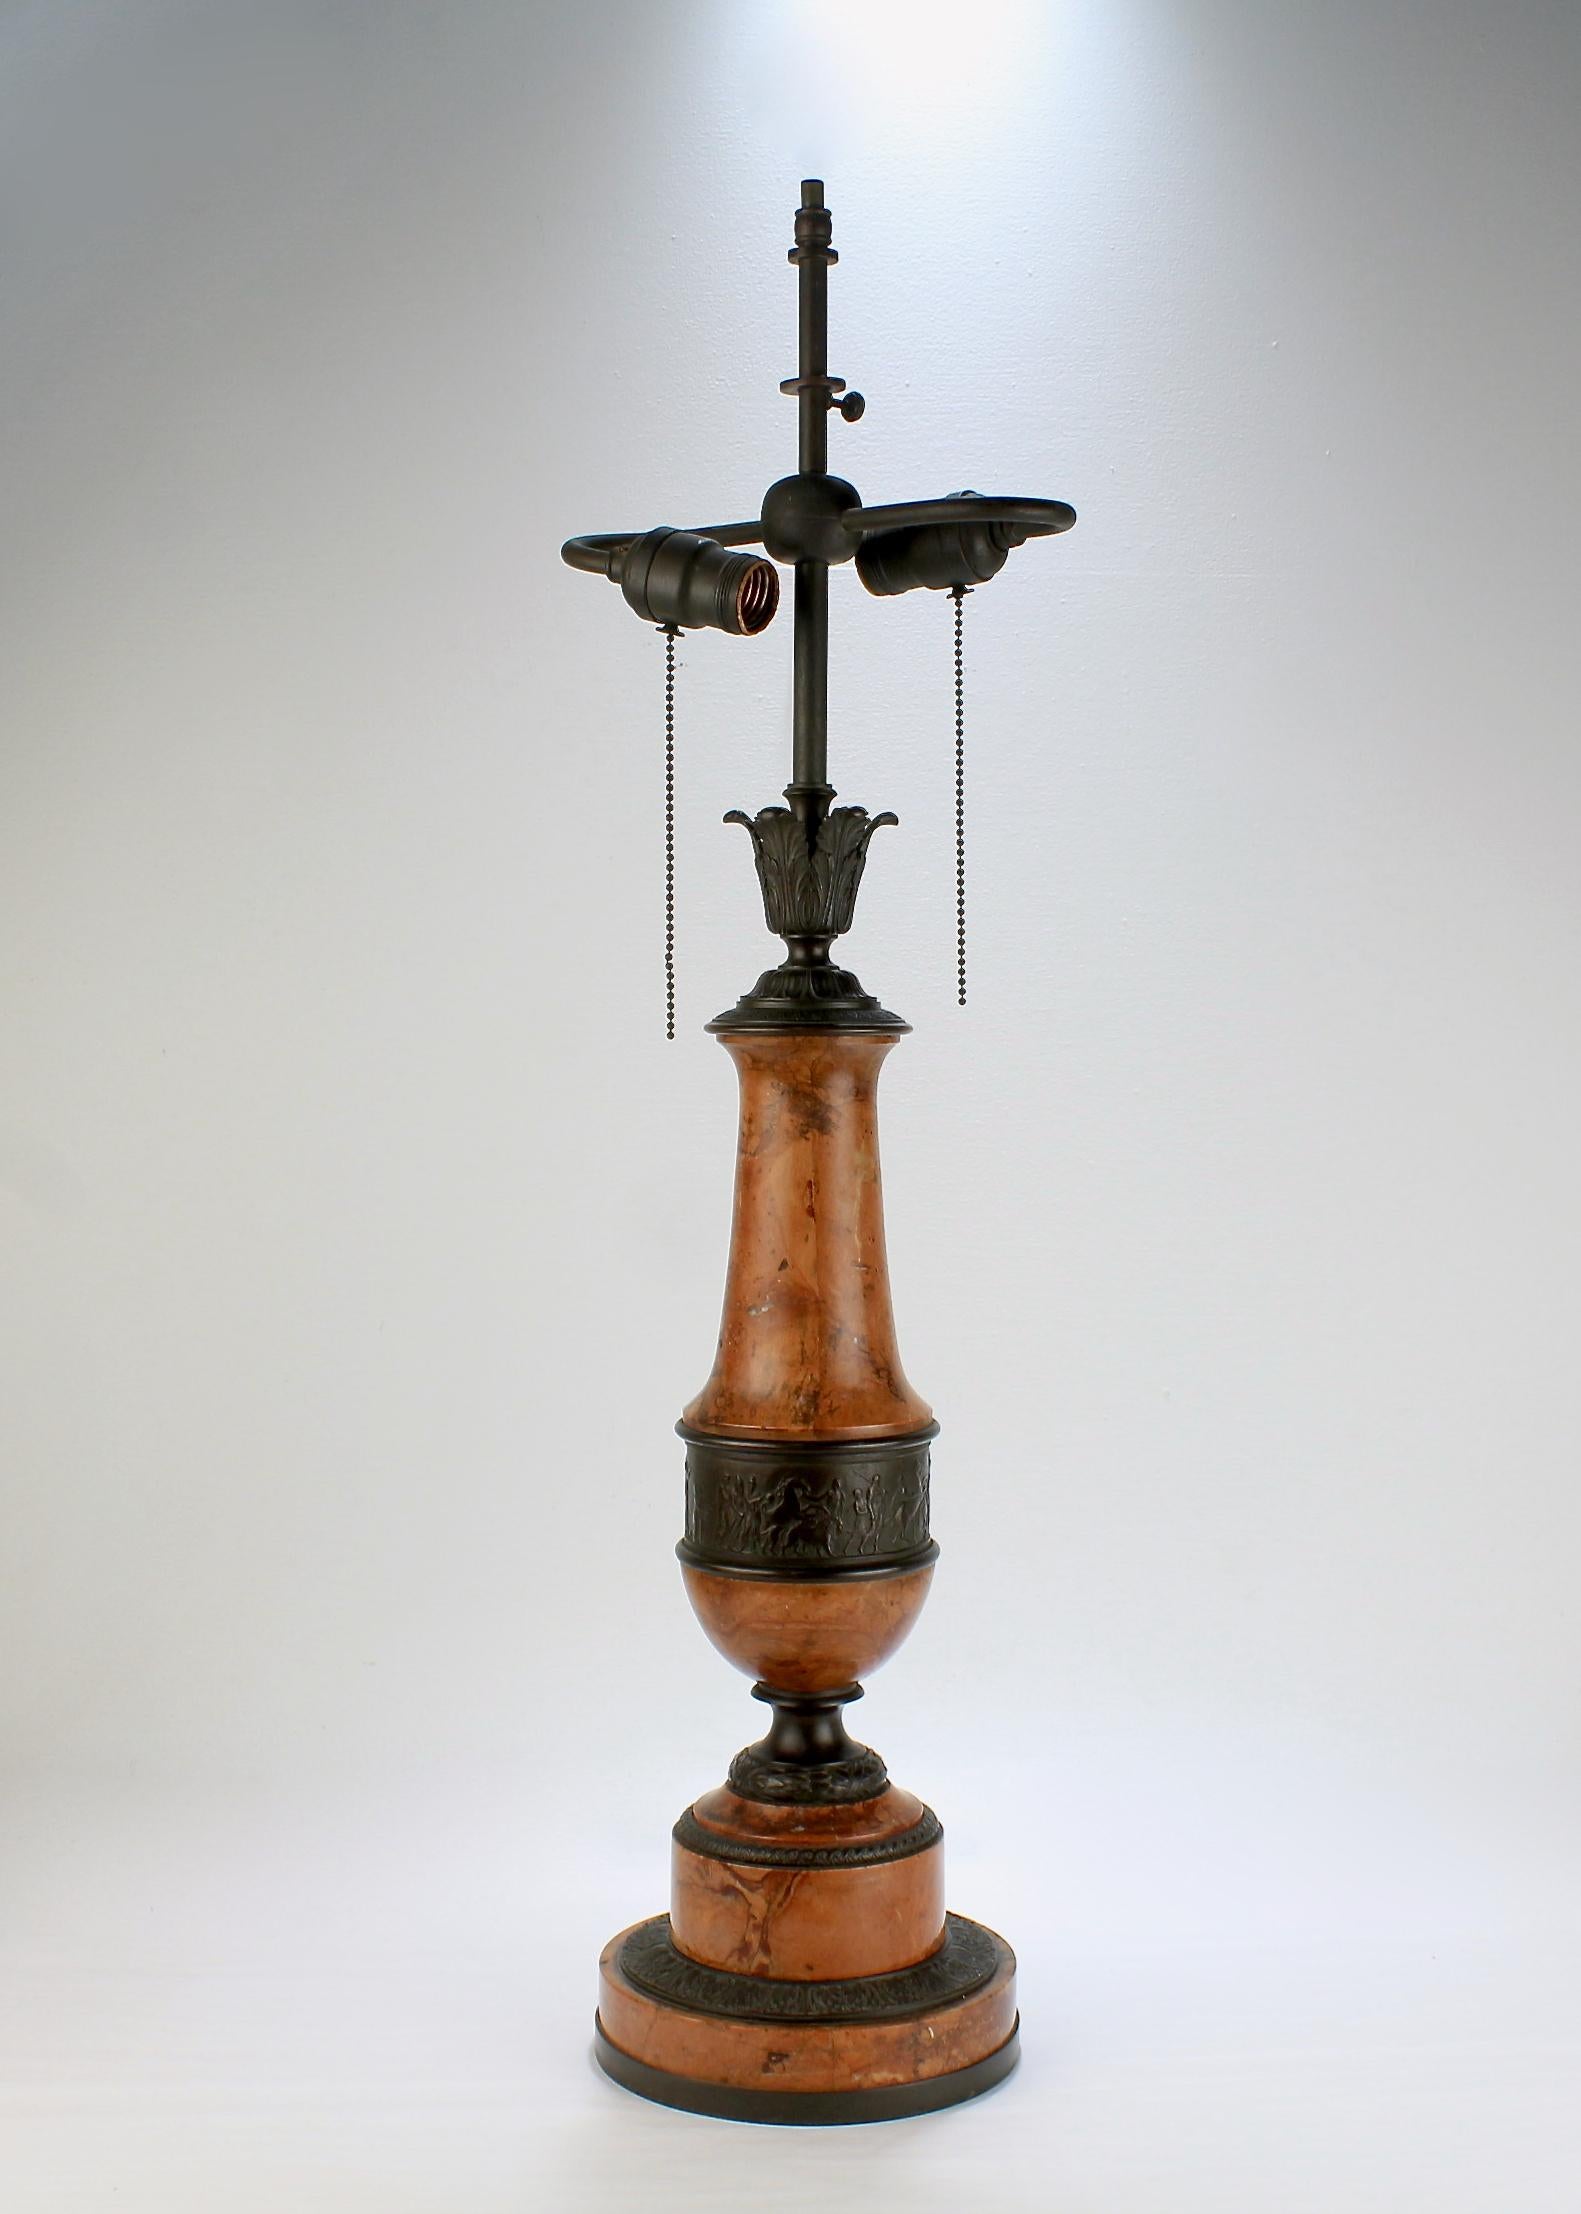 An Art Deco period Austrian bronze and marble lamp.

Retailed by Benjamin Altman and Co., the longtime luxury Midtown Manhattan retailer.

Comprised of alternating chocolate colored bronze and marble elements.

The marble has pink, yellow and